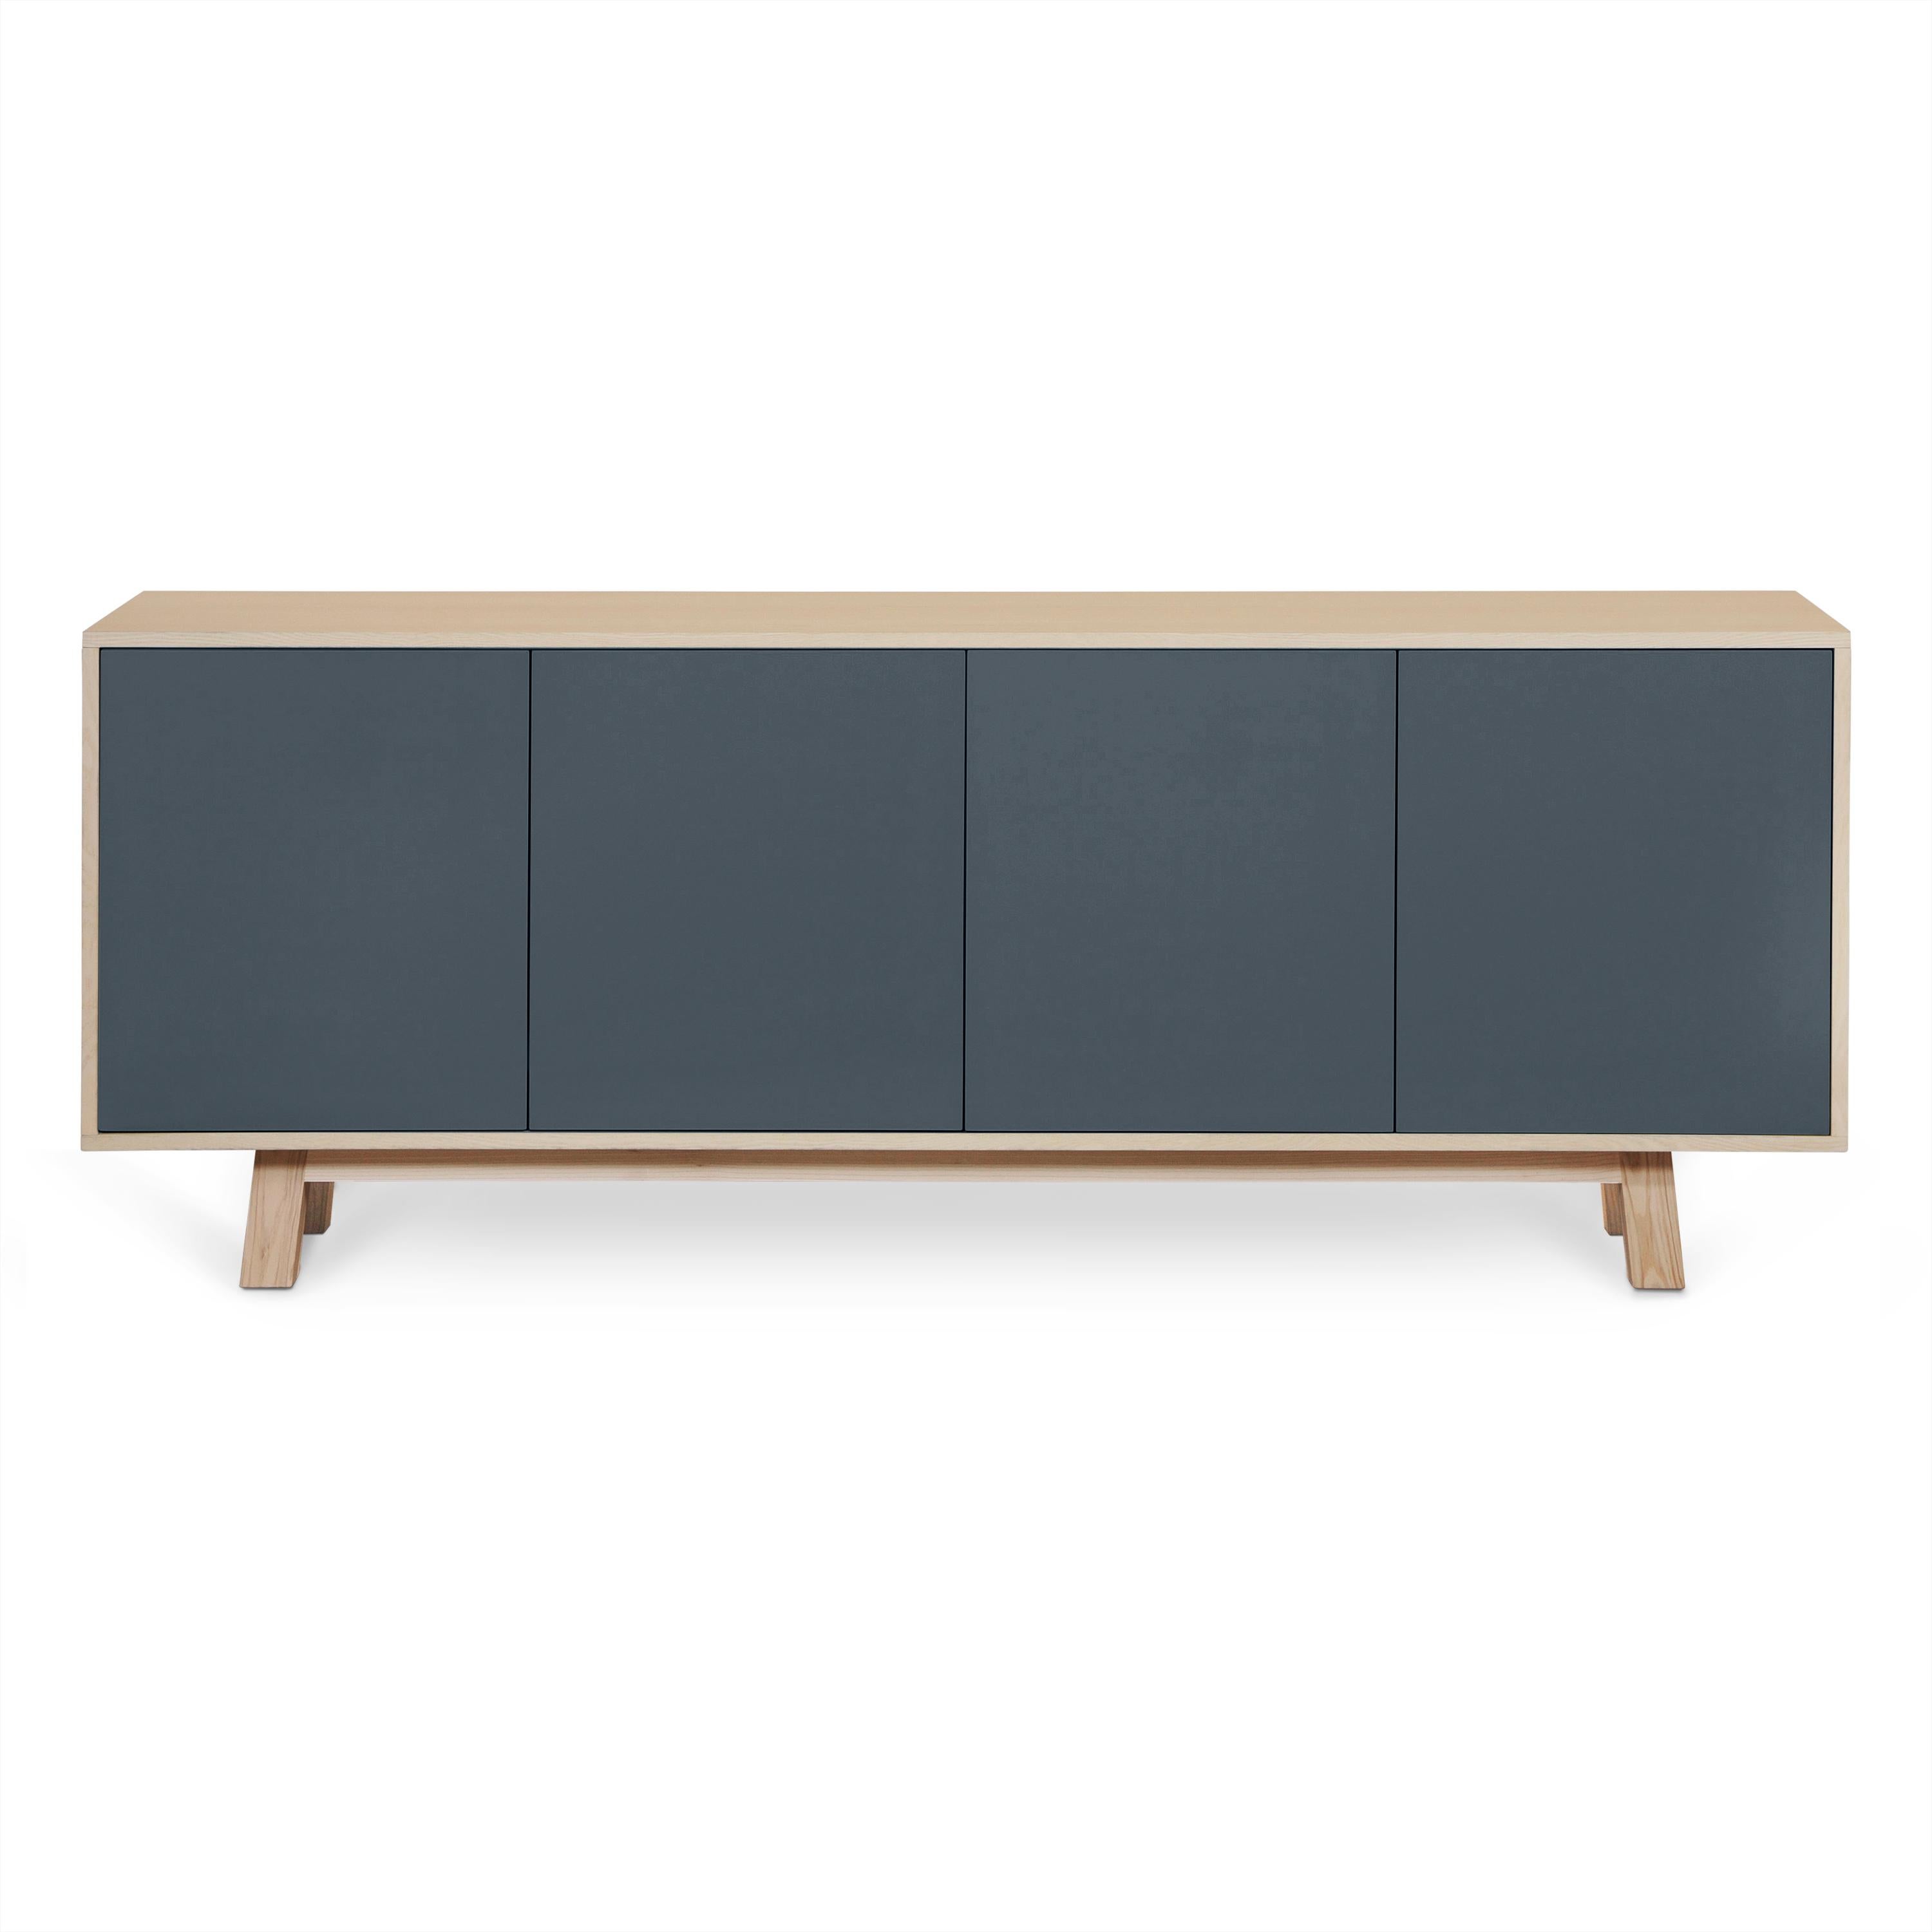 French Dark Blue 4-Door Sideboard, Design Eric Gizard, Paris, Made in France For Sale